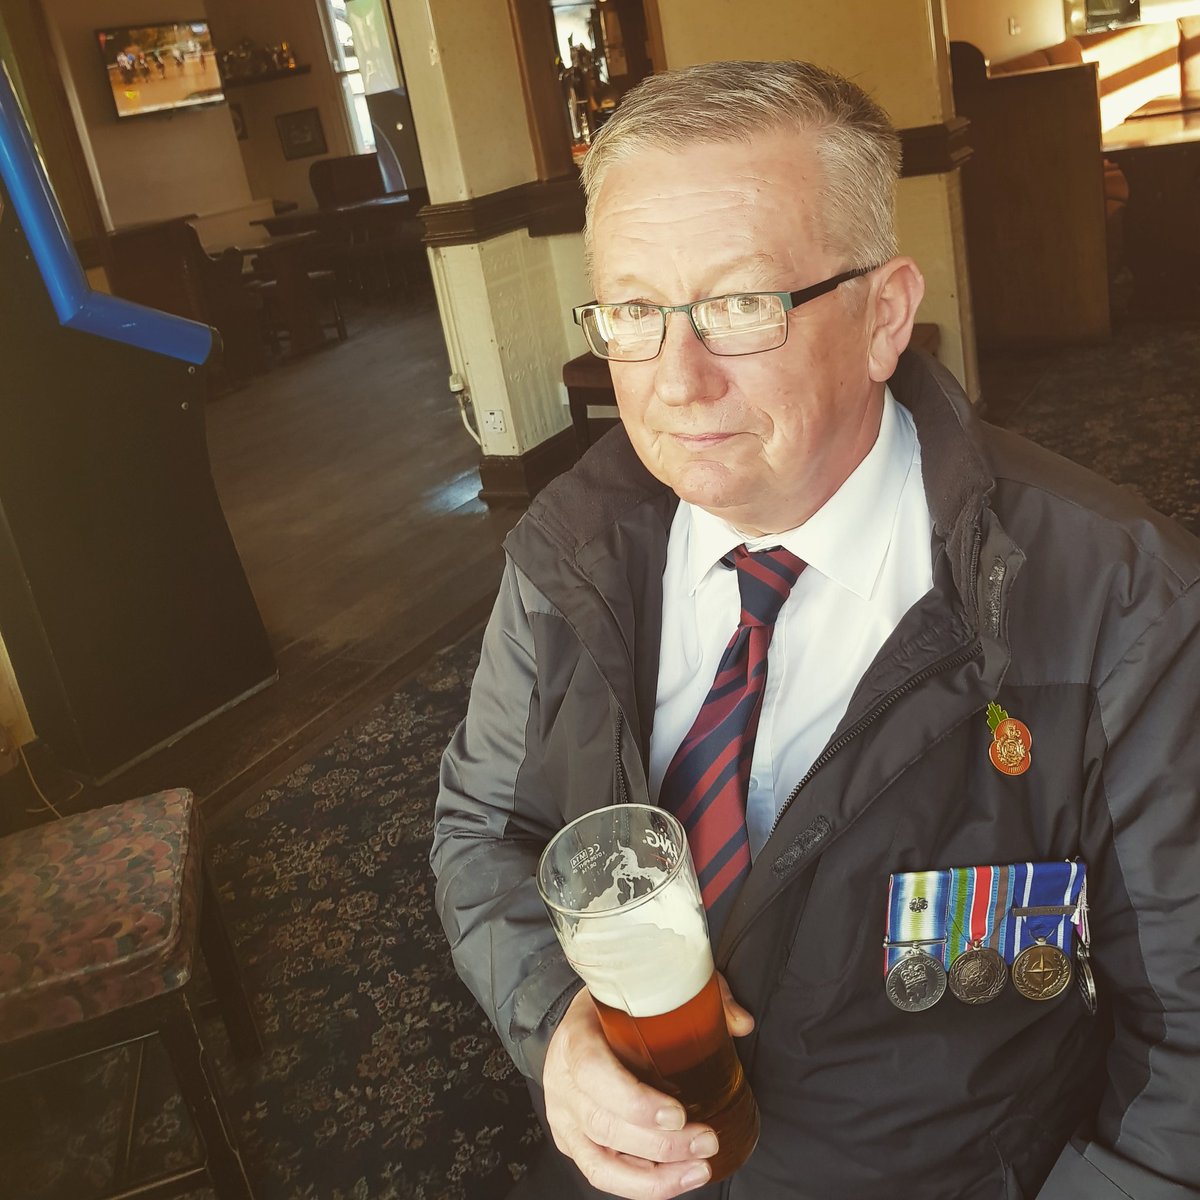 Forever my hero #RemembranceSunday #RemembranceDay2019 #welldeservedpint